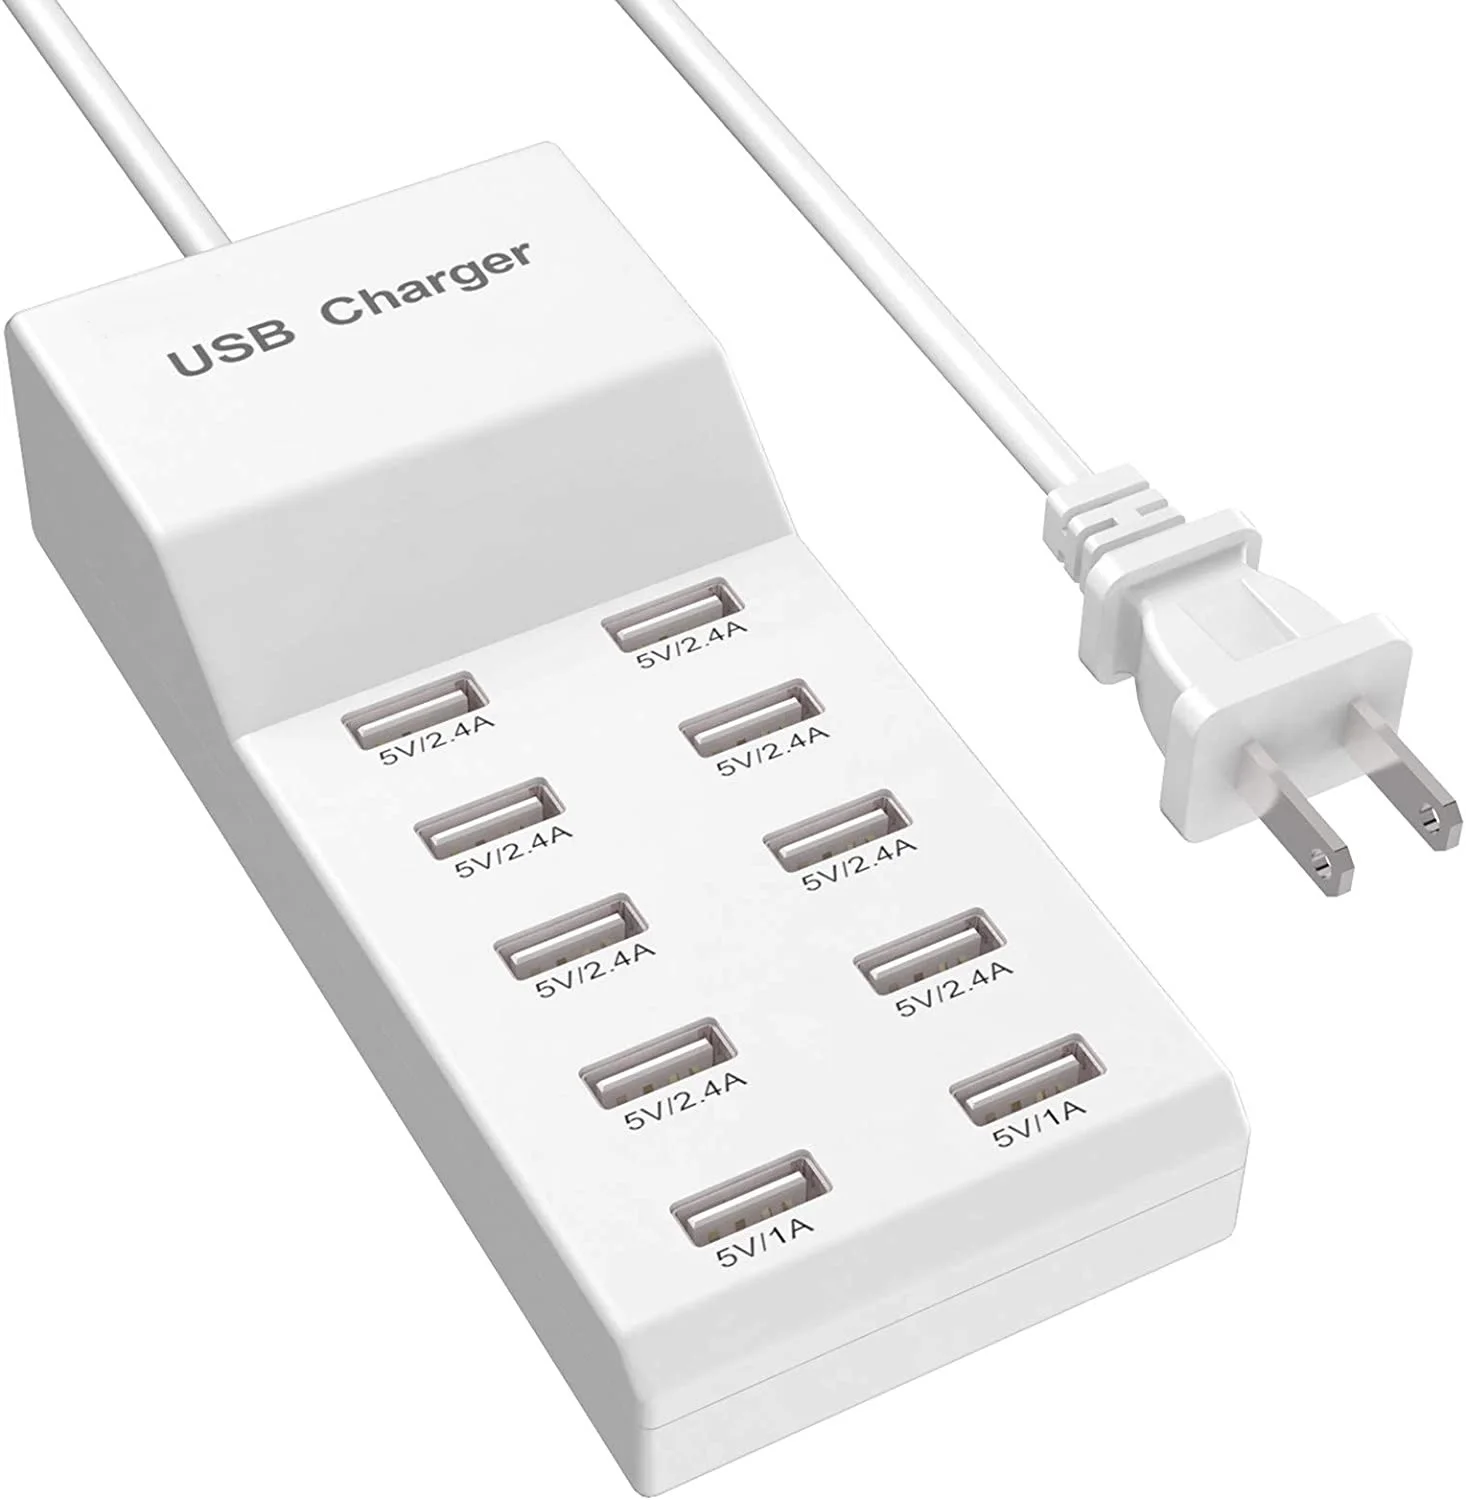 

ILEPO USB Charging Station 10-Ports 50W/10A Multi Port USB A Hub Charger for Cellphone Tablet Multiple Devices Extension Socket